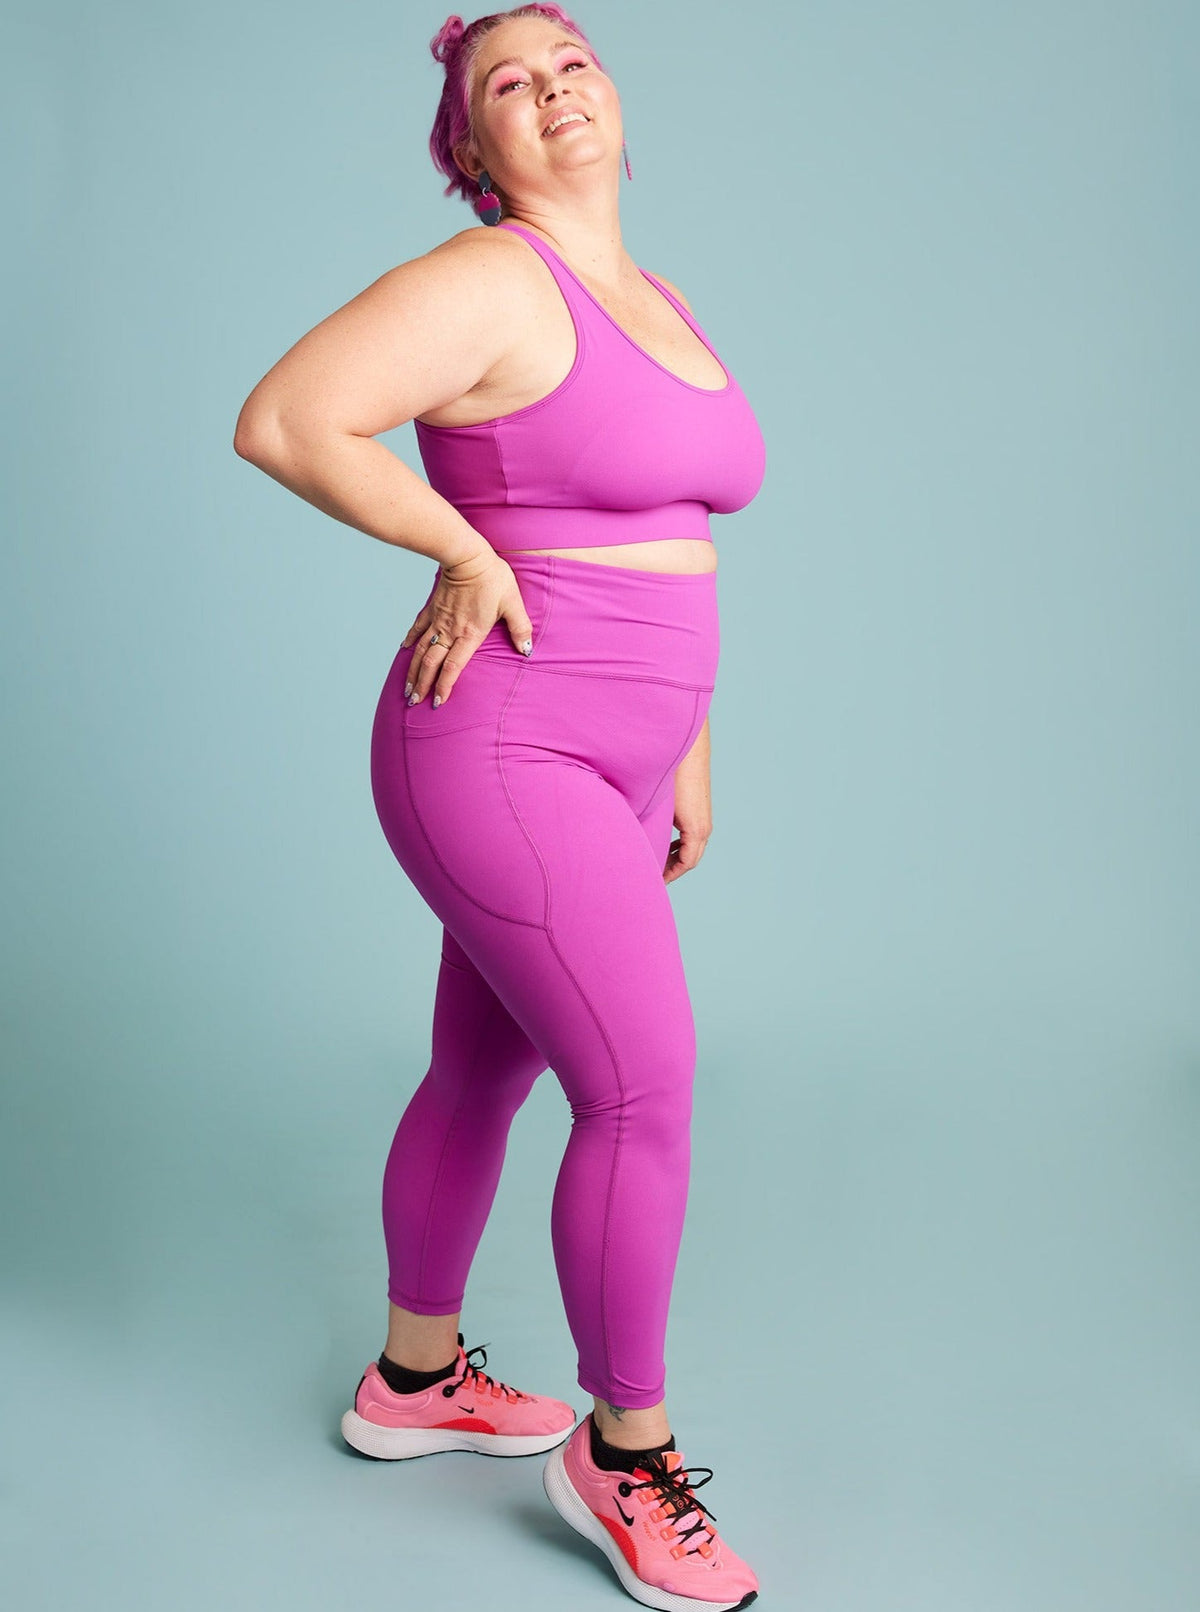 Magical Magenta Everyday Legging - 7/8 length - pink high waisted leggings with tummy control